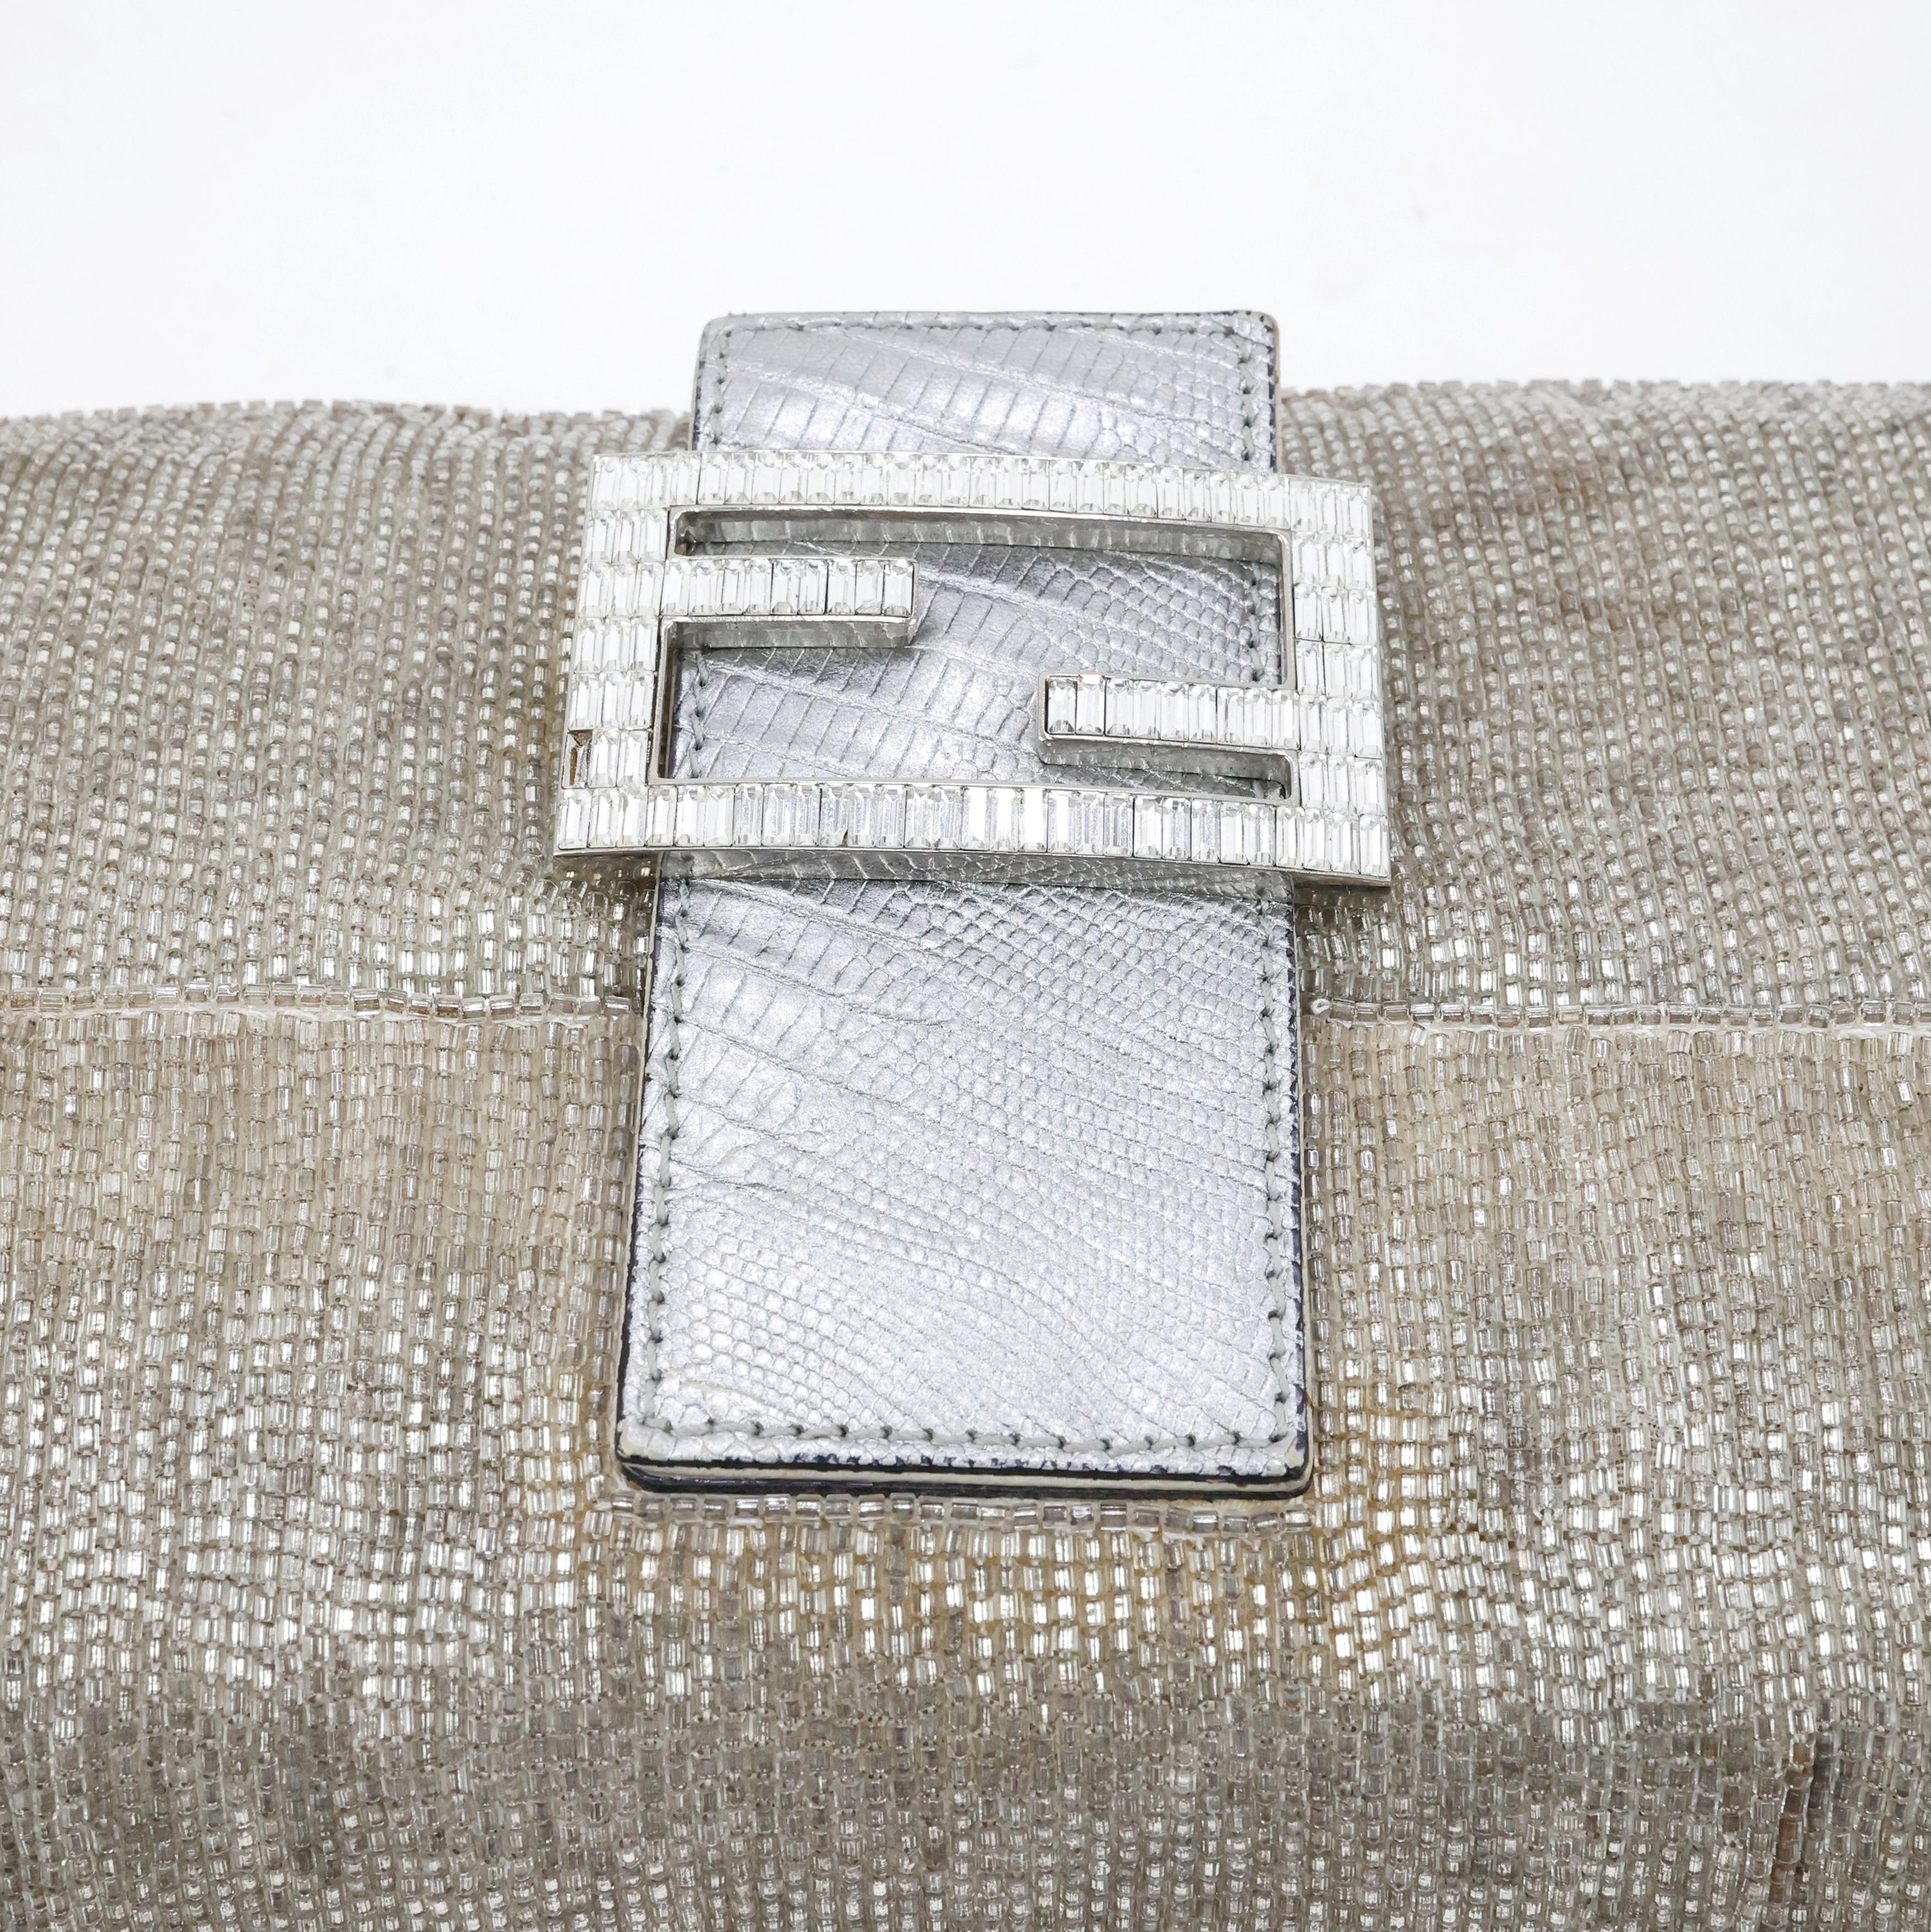 Rare Fendi Crystal Embellished Baguette with Lizard Leather For Sale 7